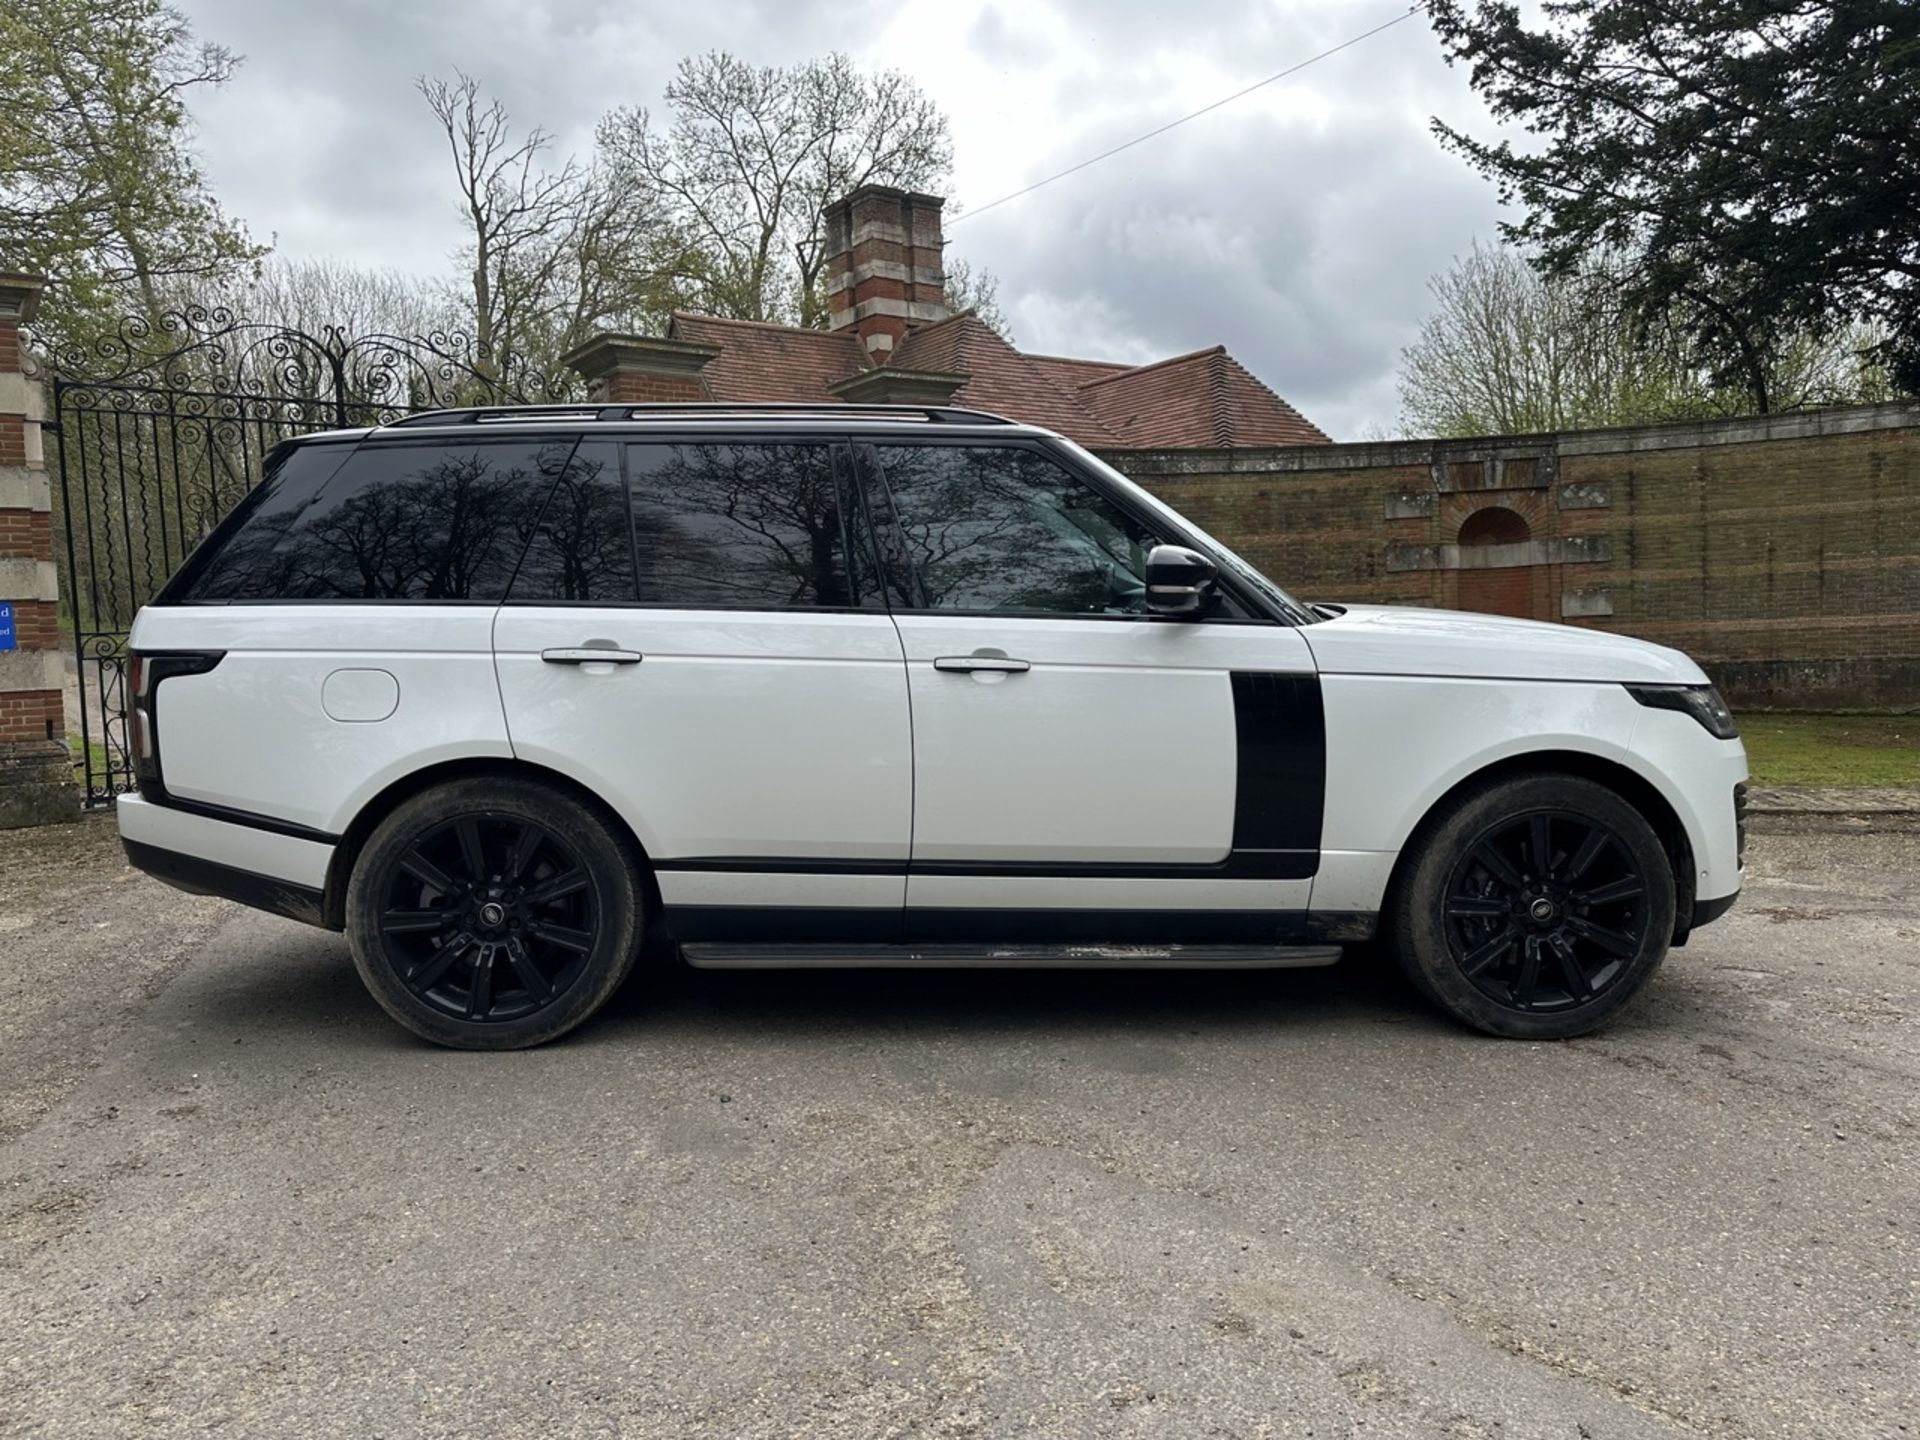 LAND ROVER RANGE ROVER 2.0 P400e Autobiography 4dr Auto - Automatic - 2018 - 31k miles - FULL SH - Image 10 of 17